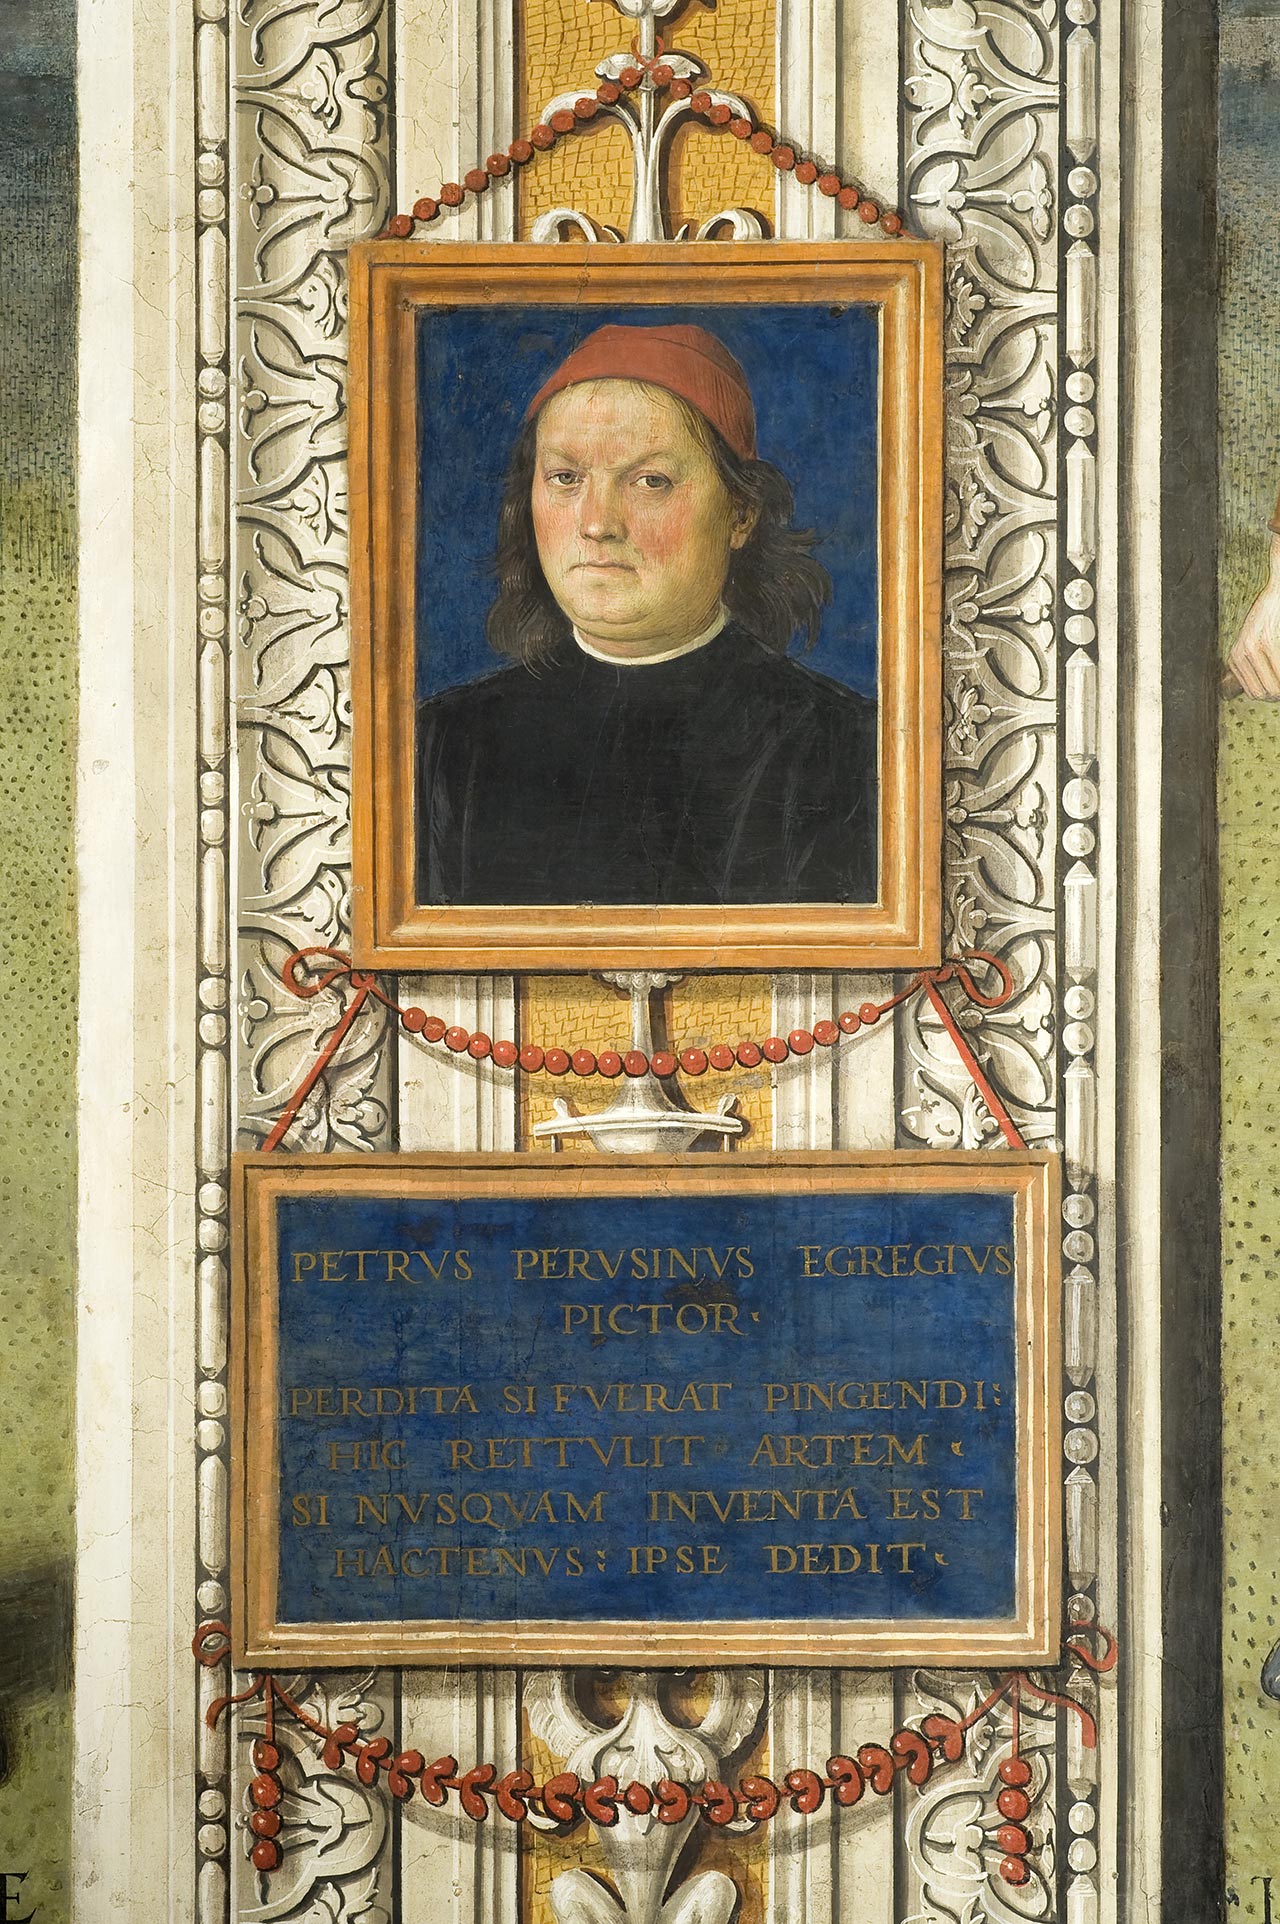 The self-portrait with the inscription